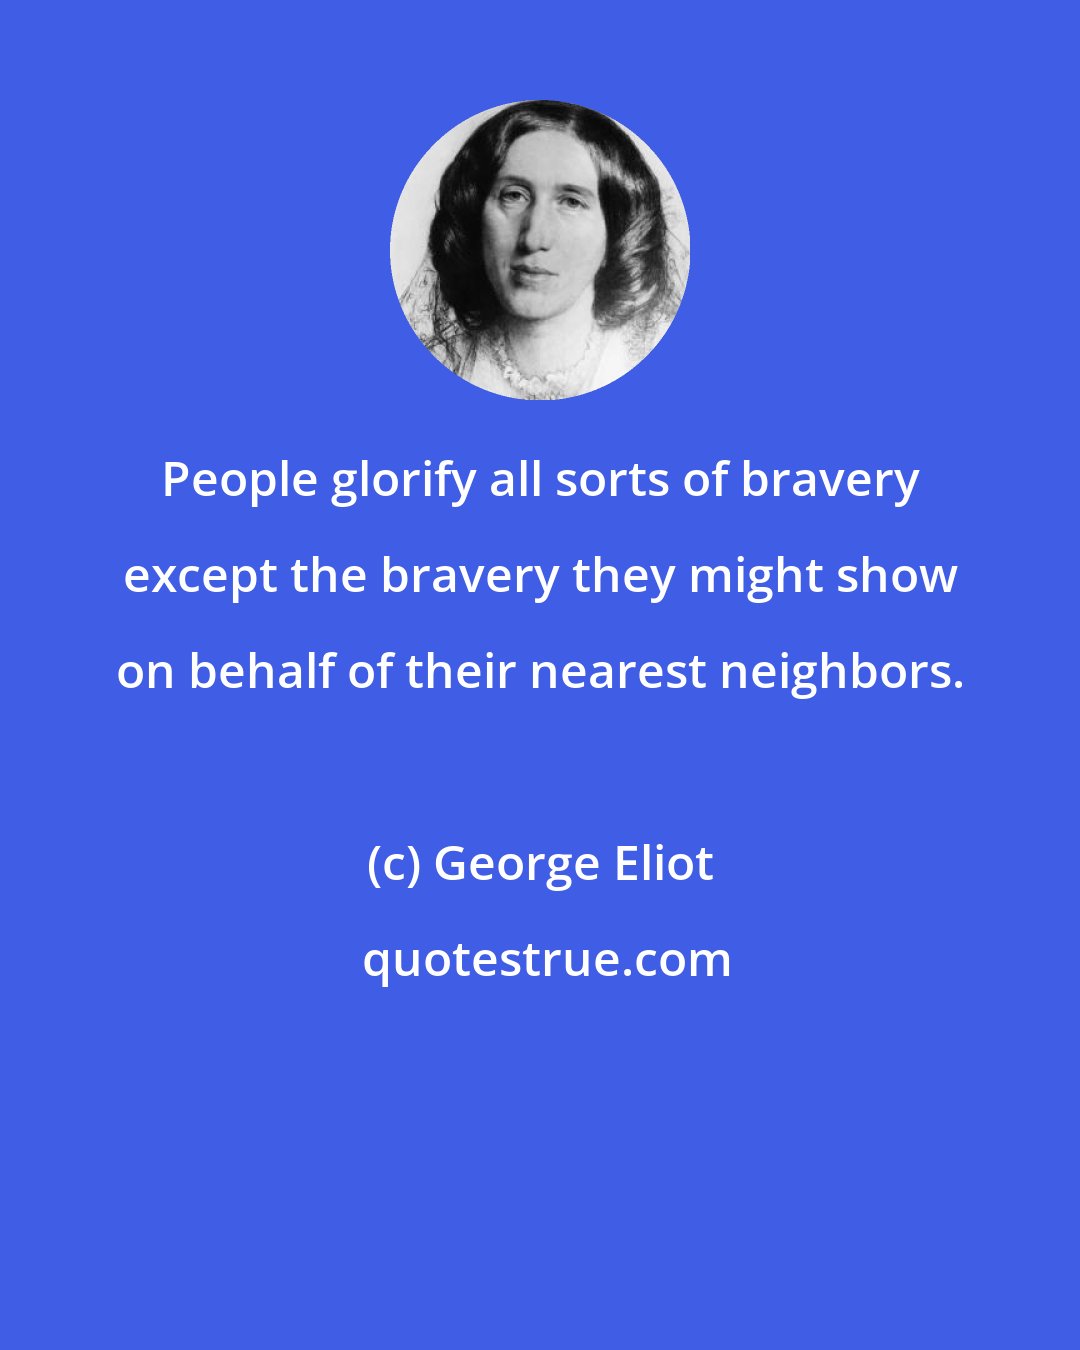 George Eliot: People glorify all sorts of bravery except the bravery they might show on behalf of their nearest neighbors.